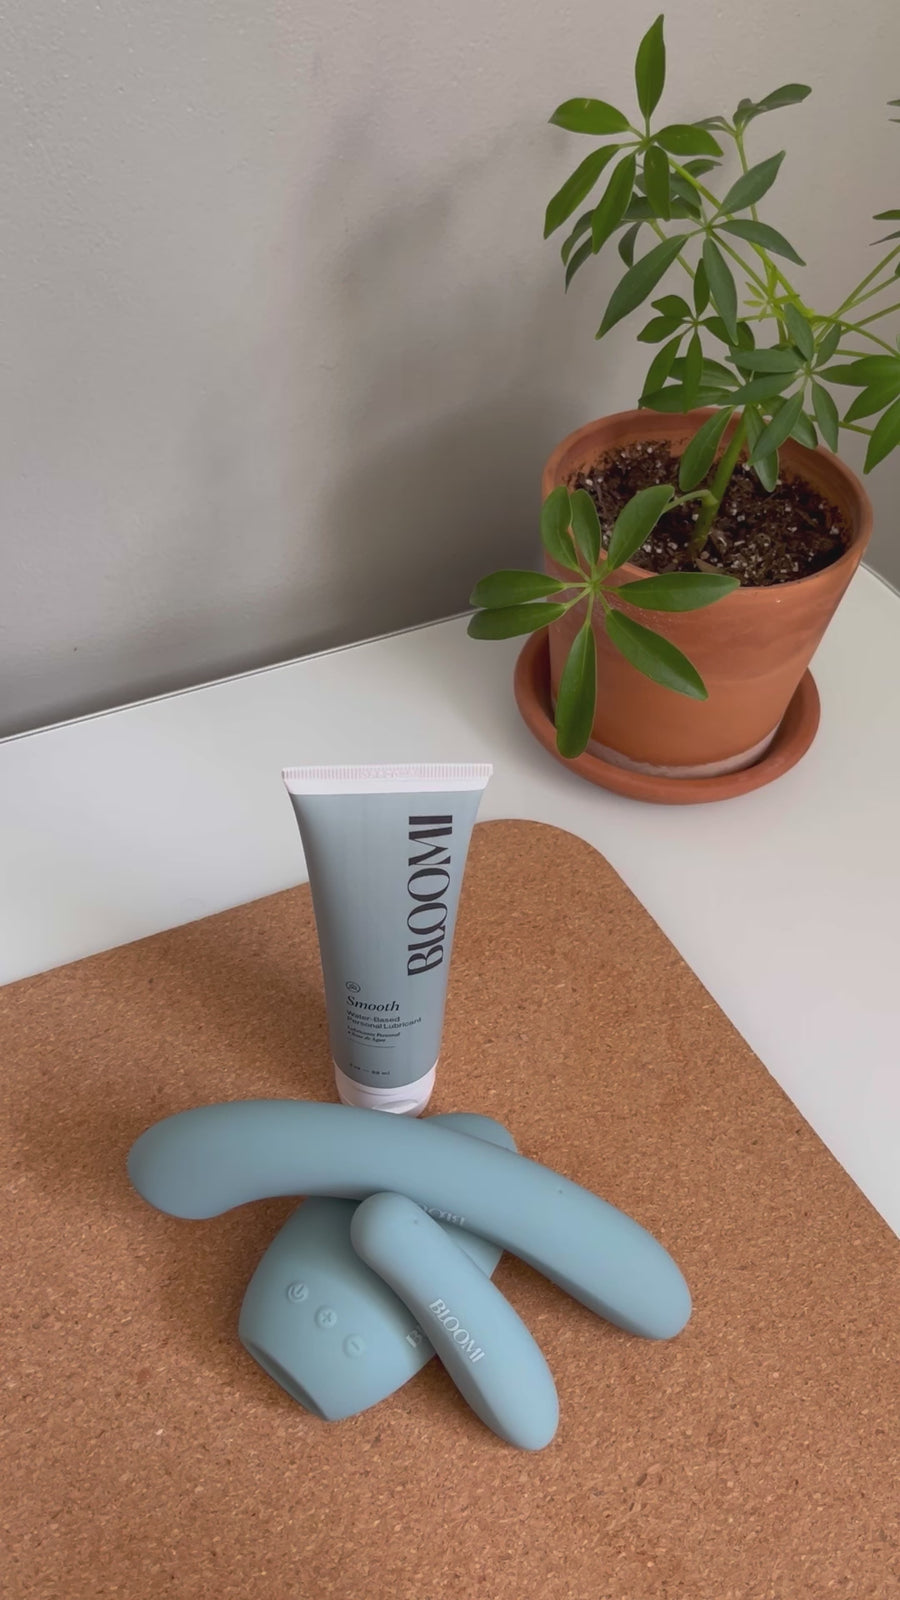 Bloomi vibrators and Smooth Personal Lubricant